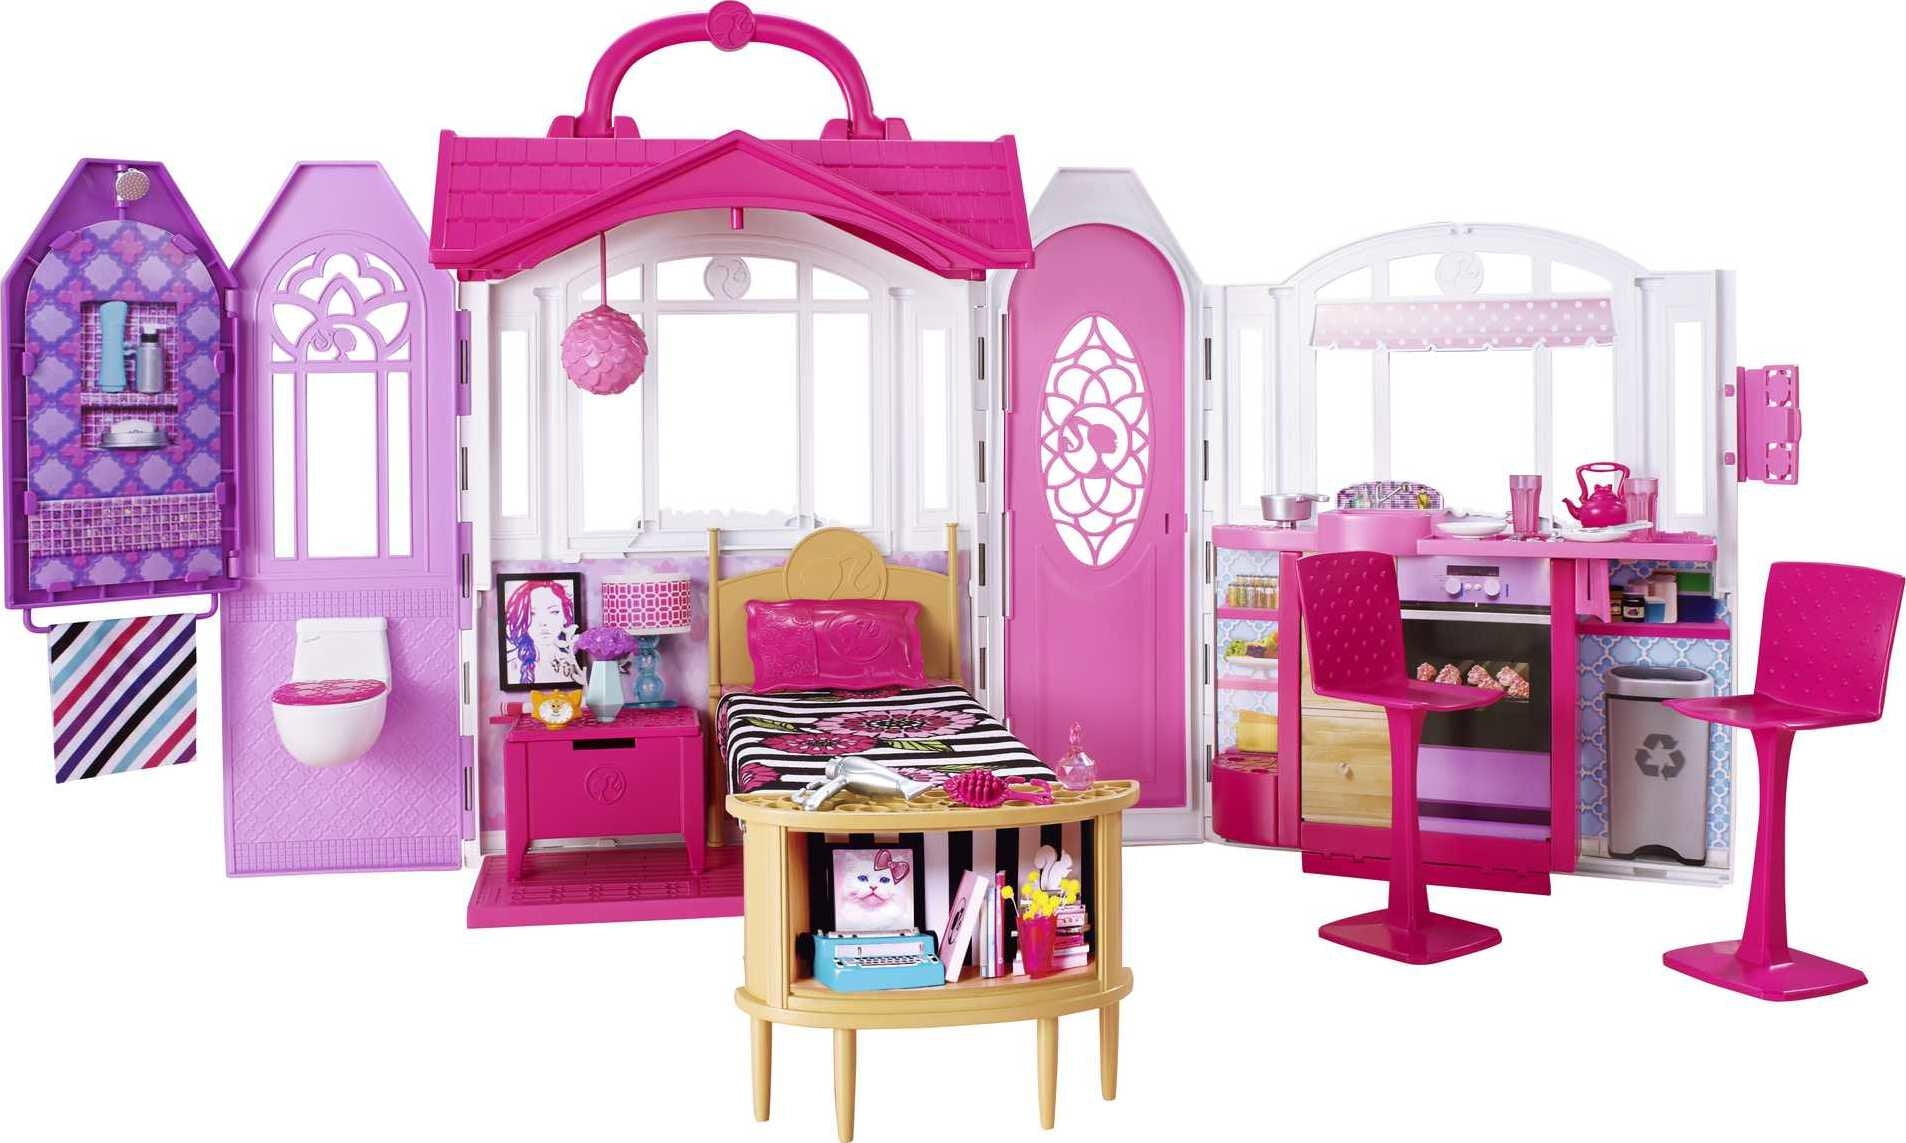 Details about   Barbie House 1-Story Dream Furniture Accessories Dollhouse Girls Fun Play 